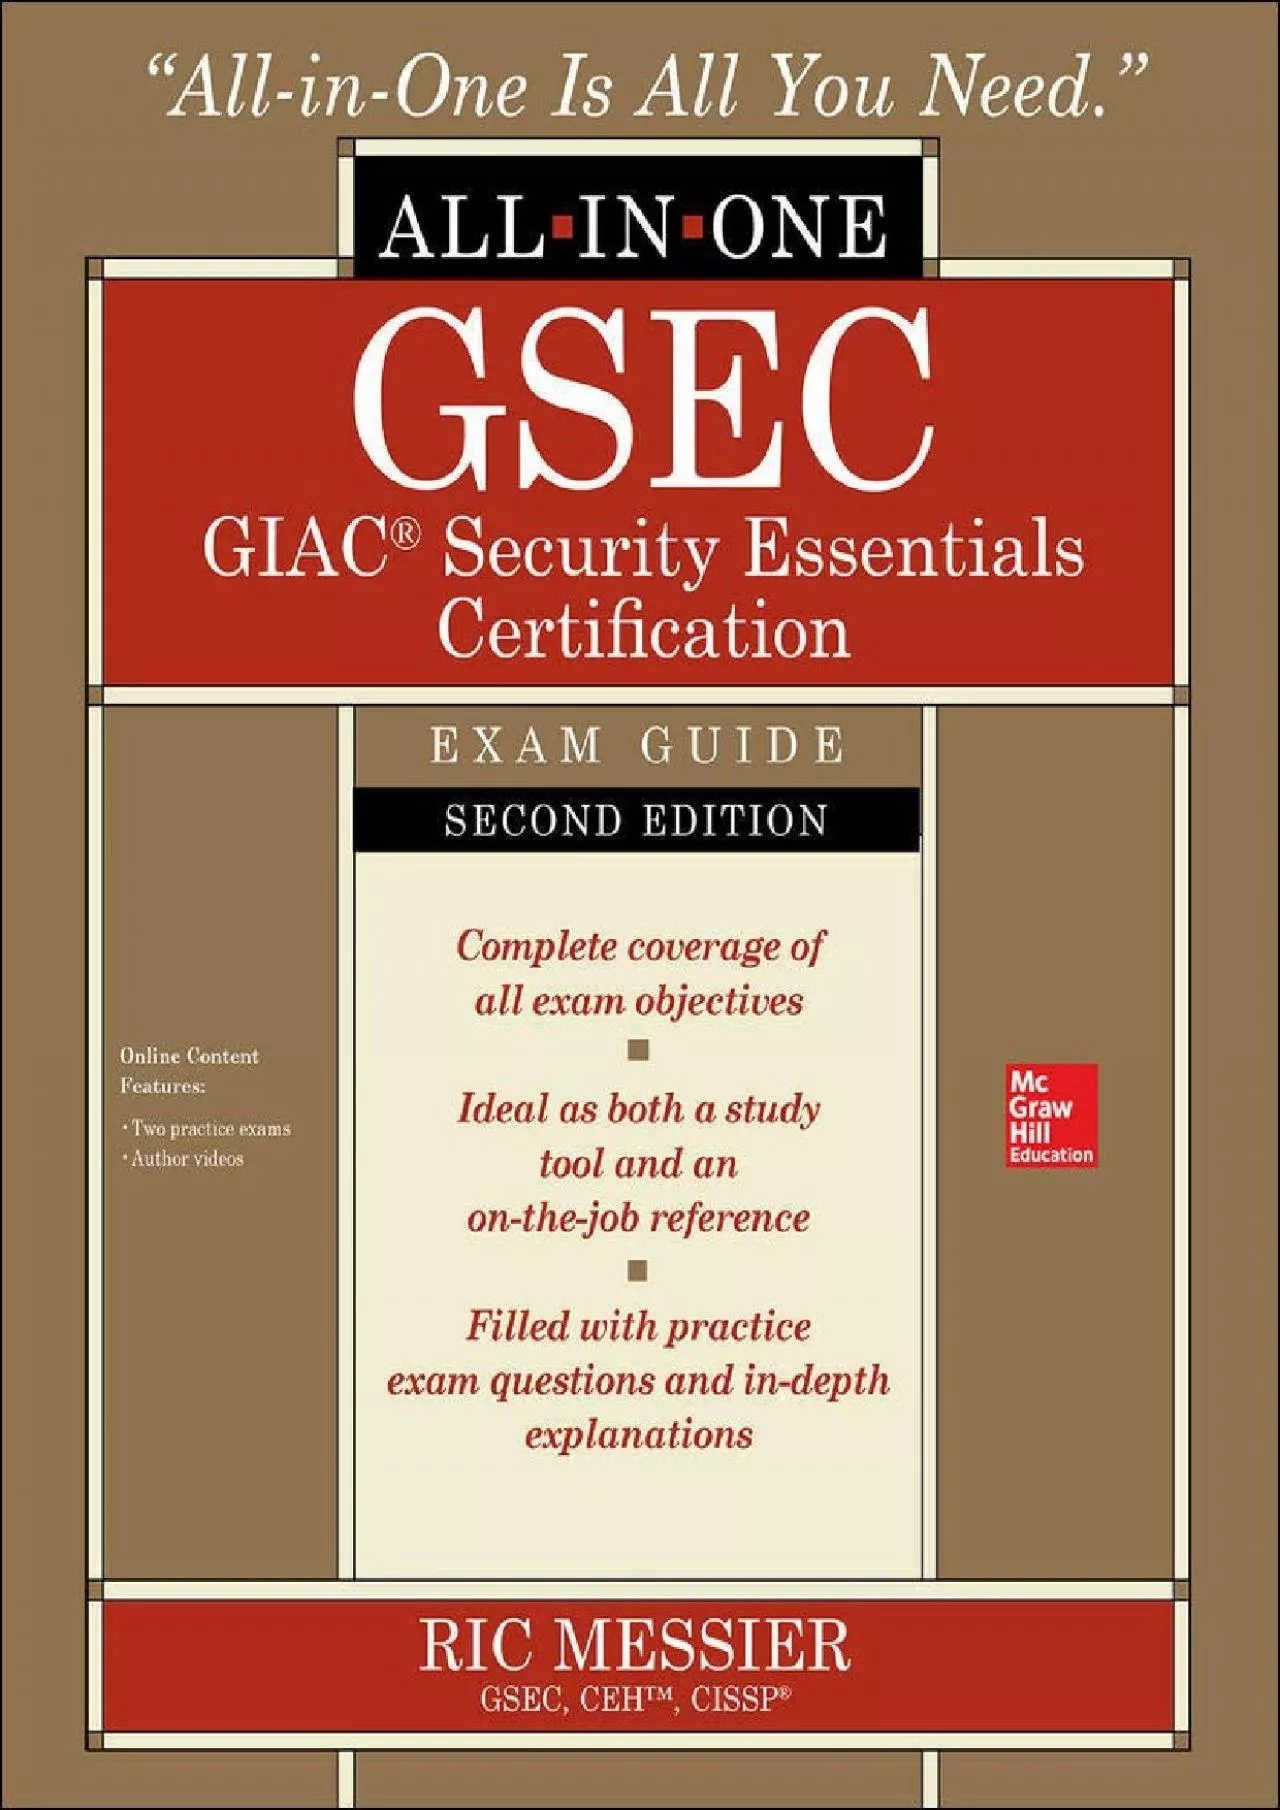 [READING BOOK]-GSEC GIAC Security Essentials Certification All-in-One Exam Guide, Second